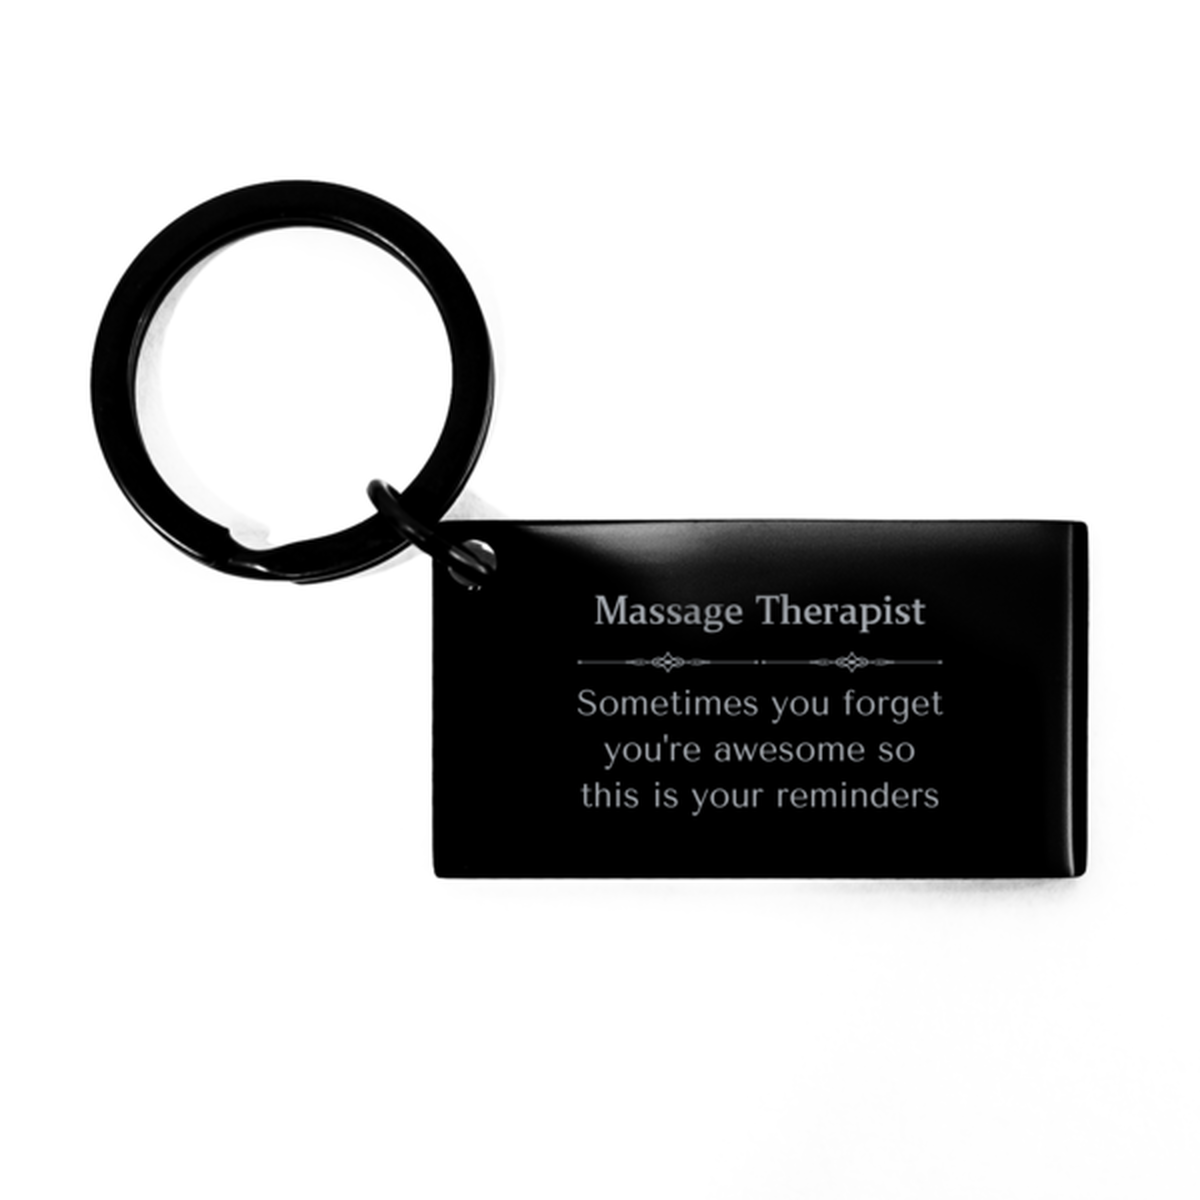 Sentimental Massage Therapist Keychain, Oil Worker Sometimes you forget you're awesome so this is your reminders, Graduation Christmas Birthday Gifts for Massage Therapist, Men, Women, Coworkers